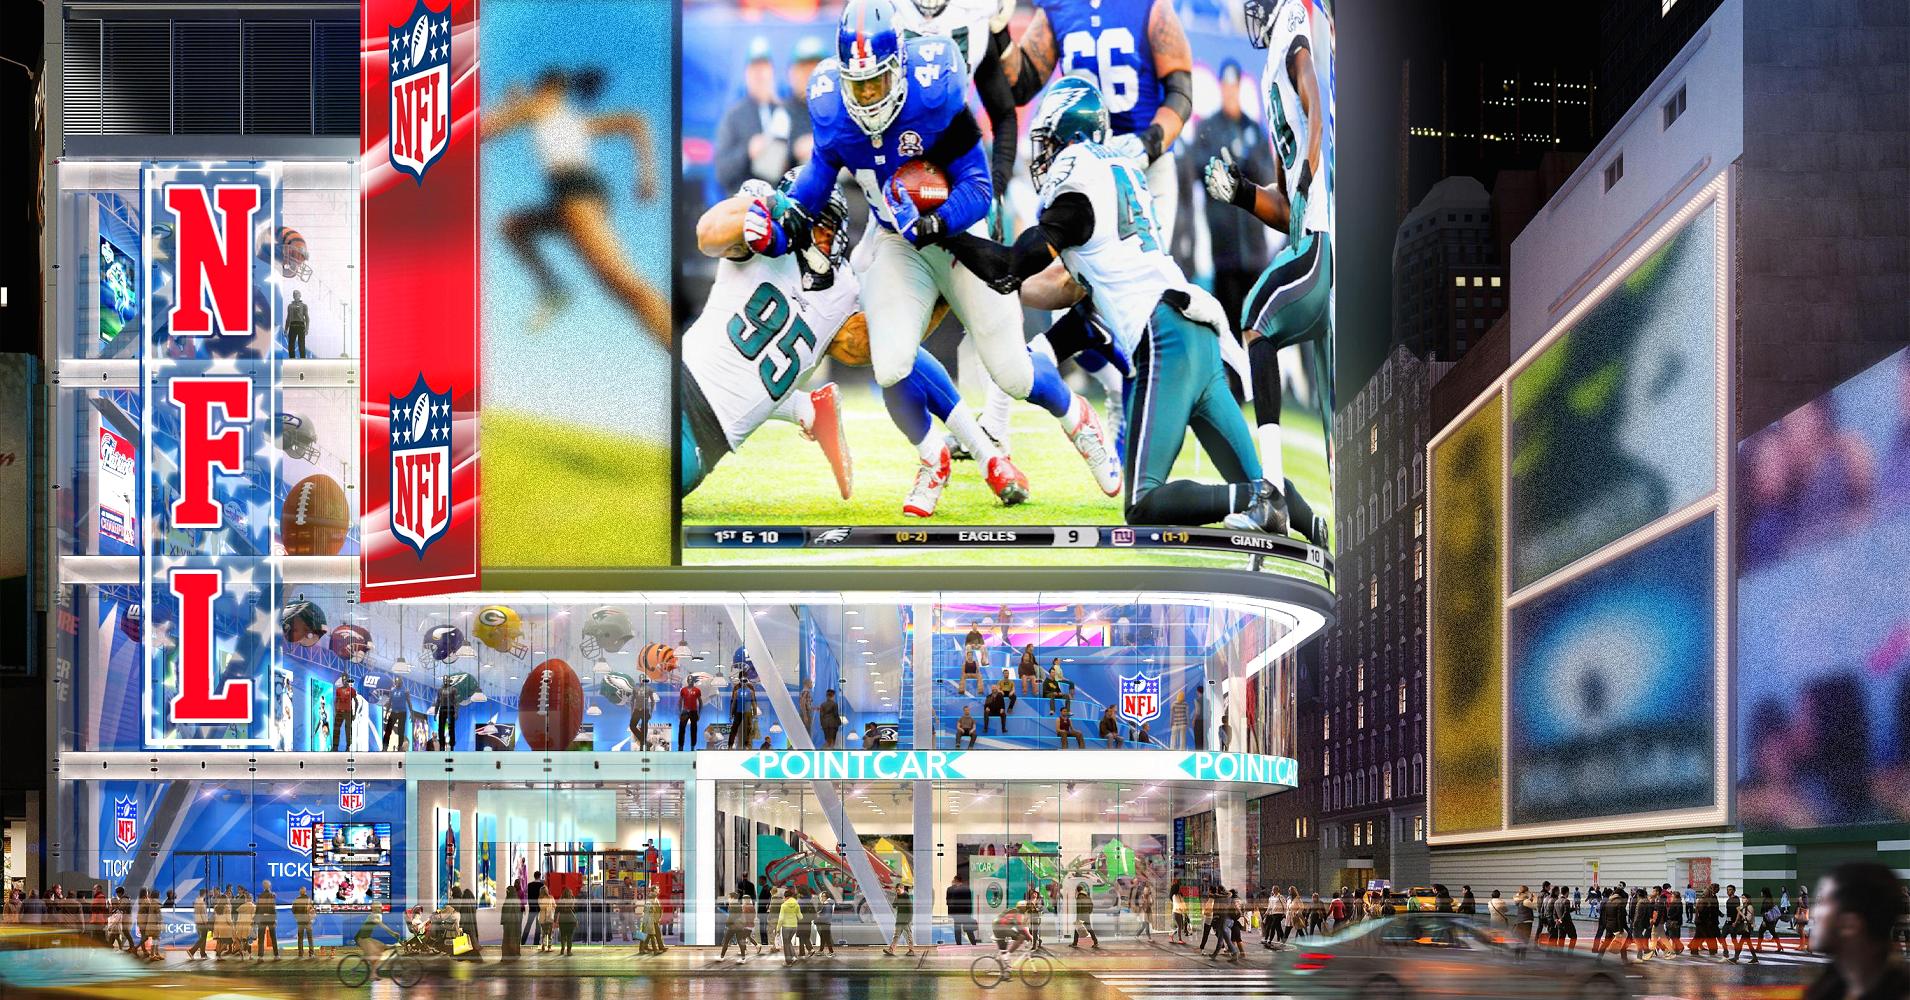 What the new NFL, FootLocker ($FL), and Hershey ($HSY) stores in Times SQ are revealing to #thematicinvestors